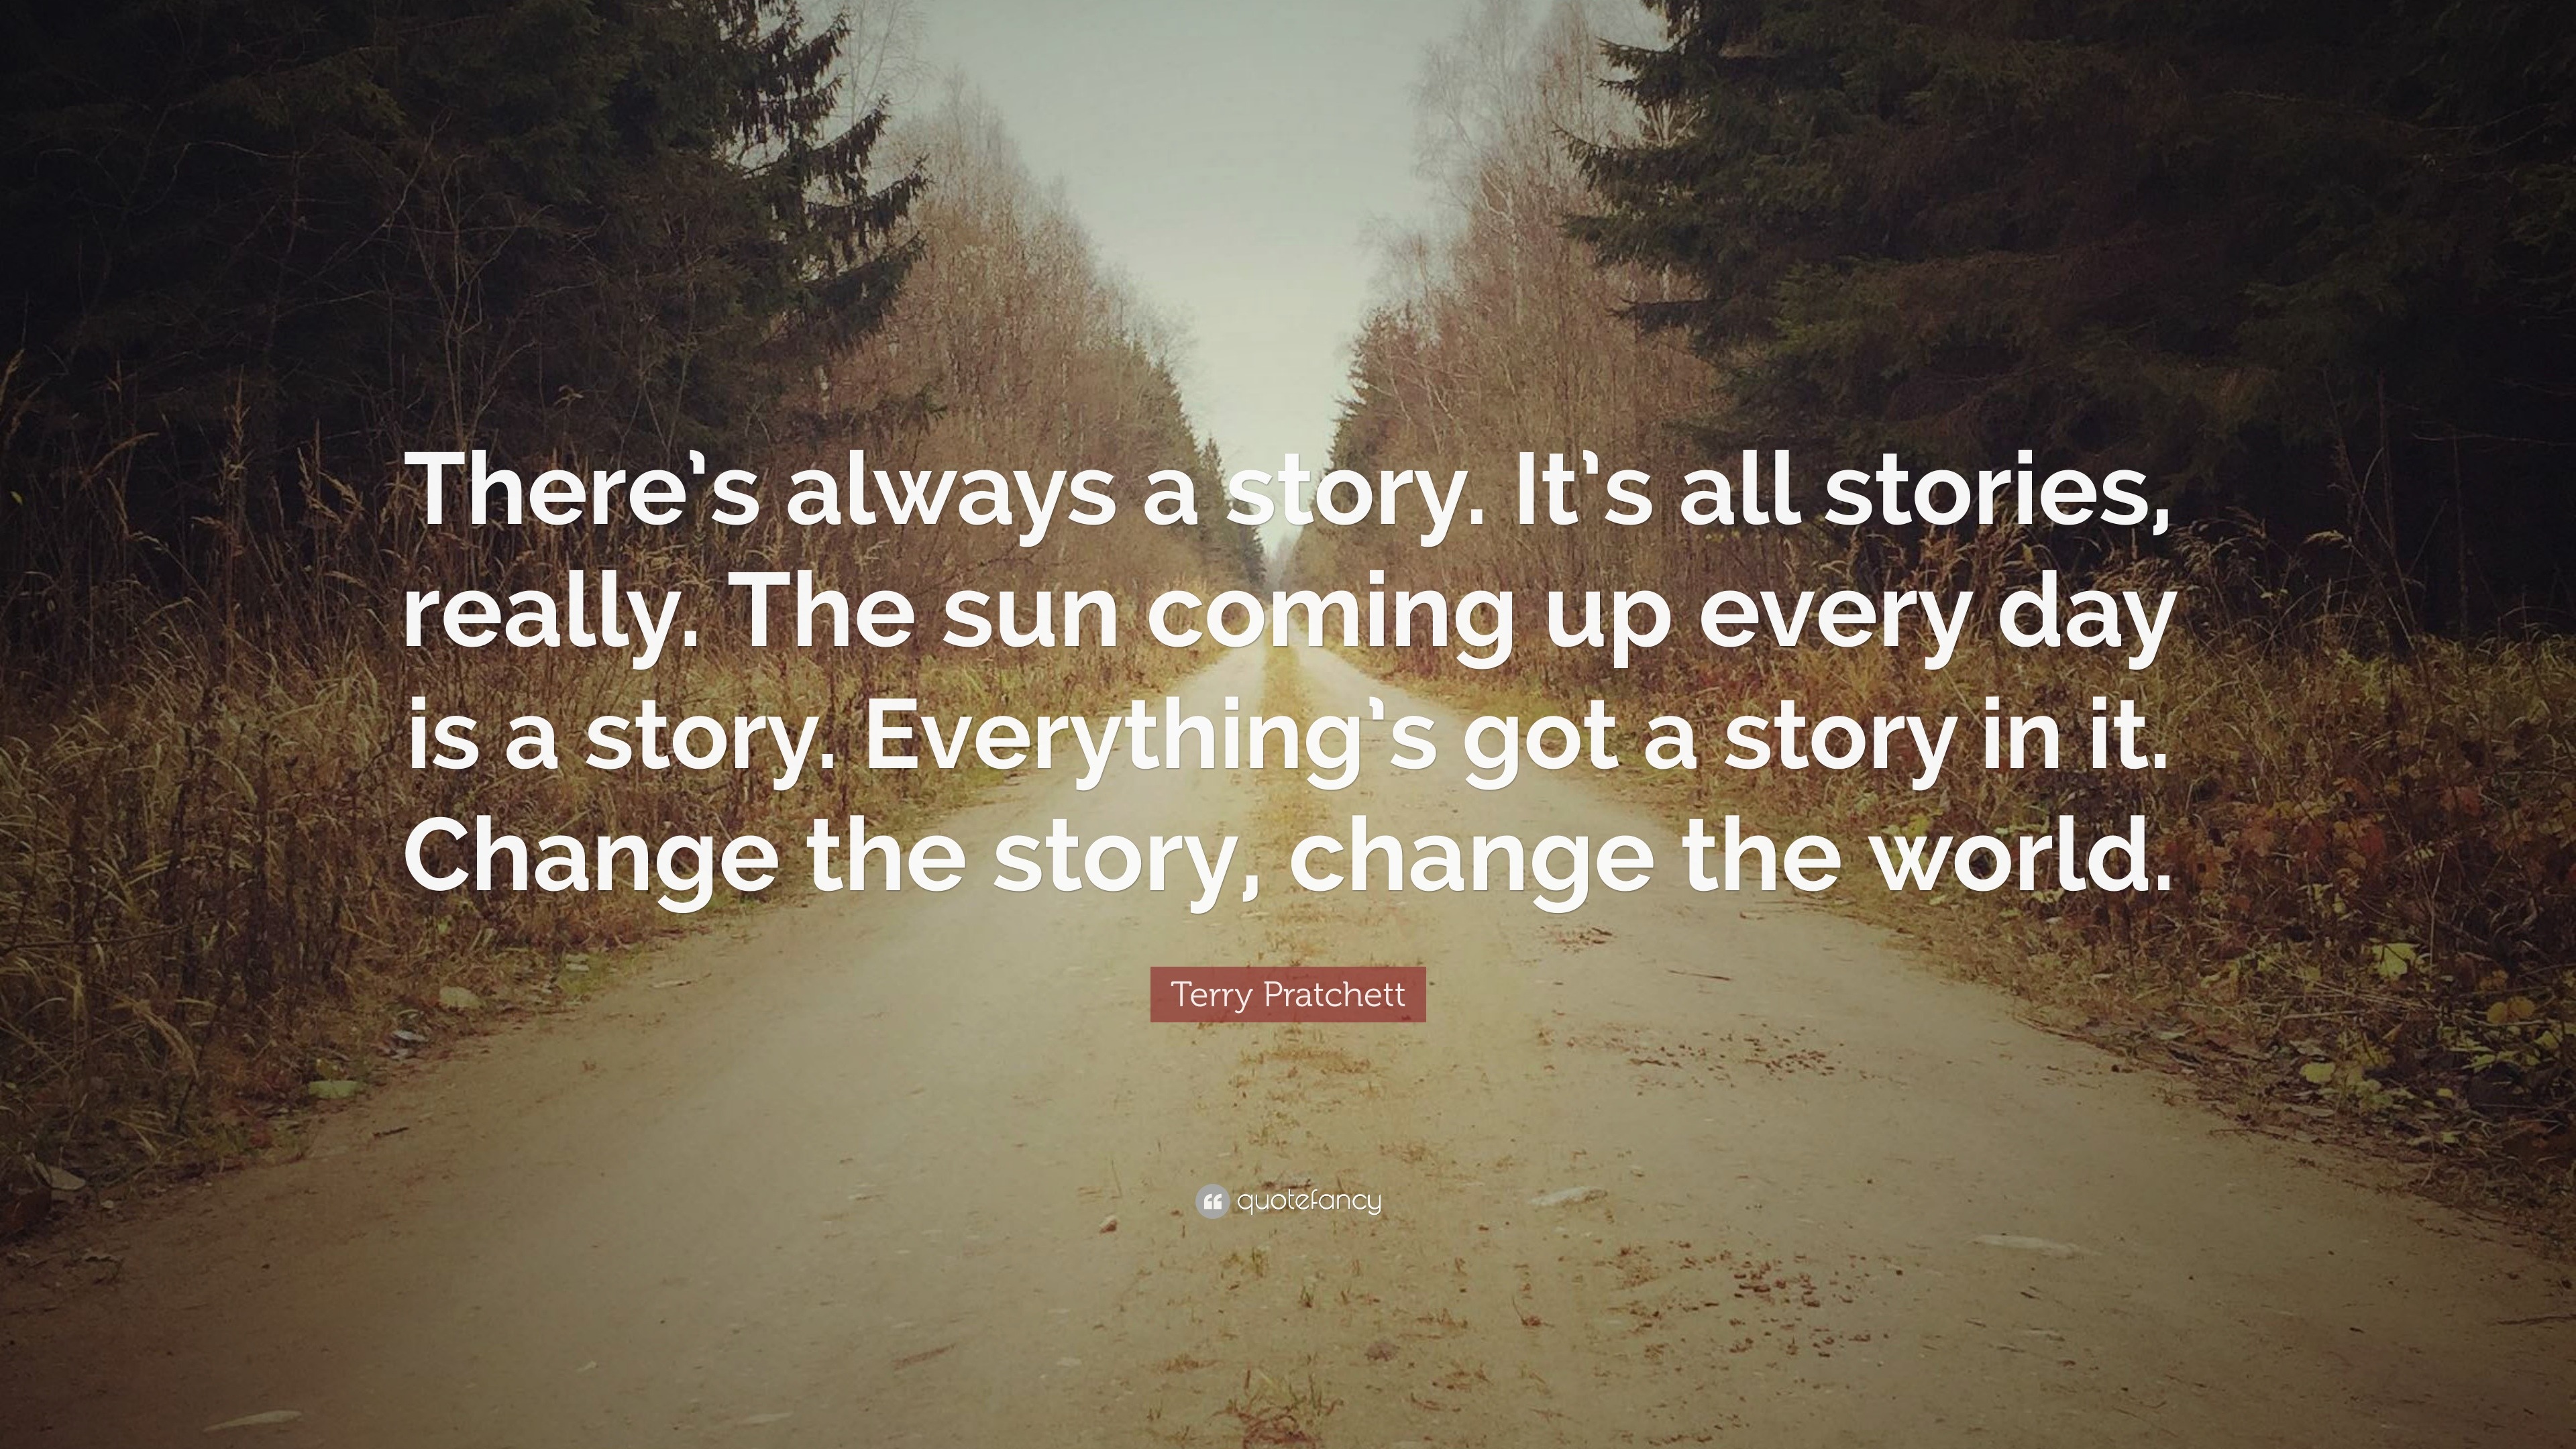 Terry Pratchett Quote: “There’s always a story. It’s all stories